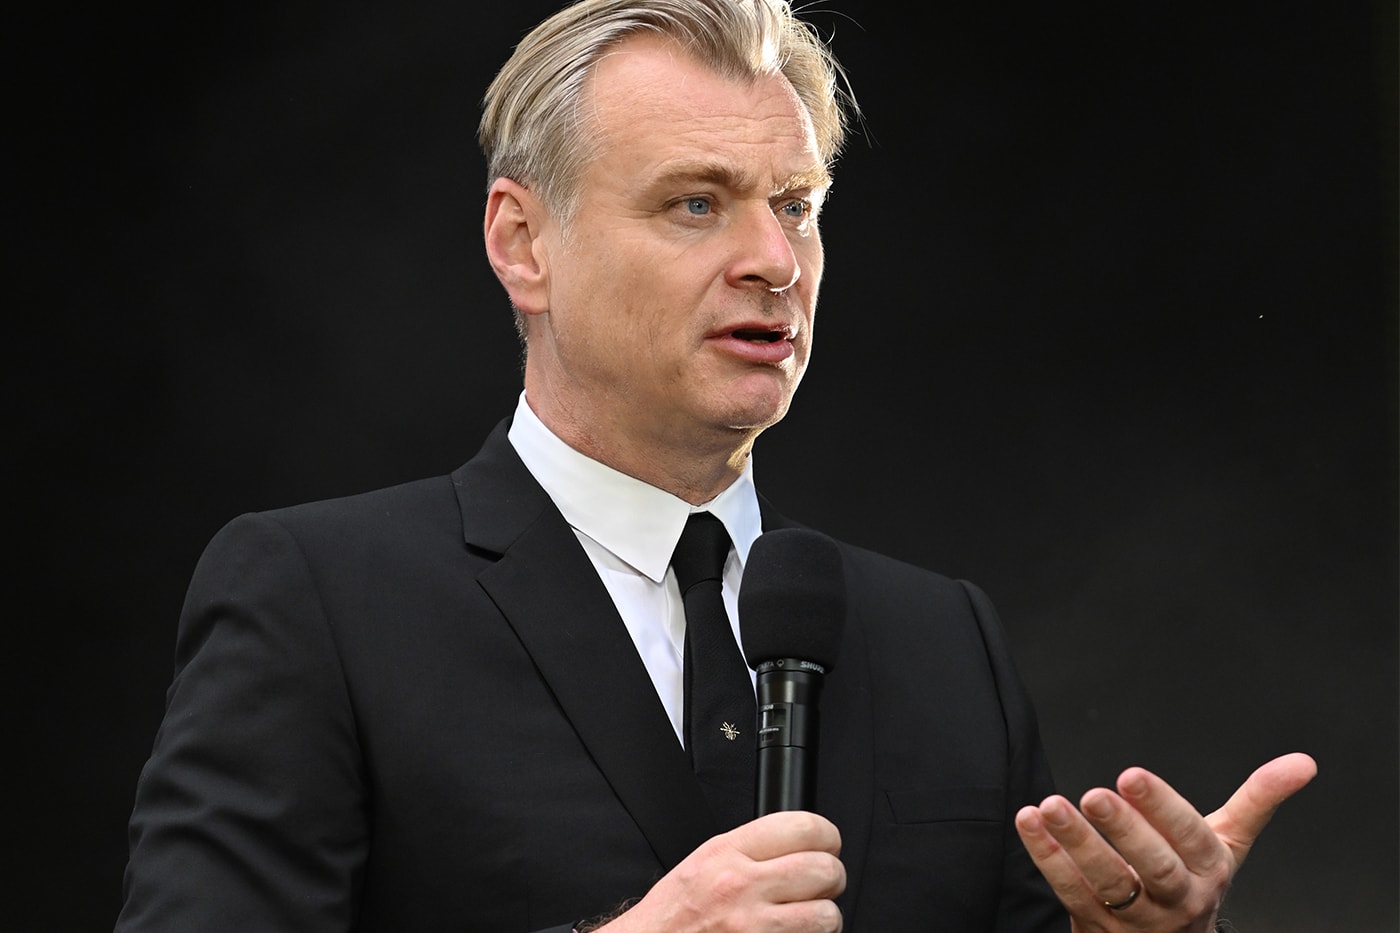 Christopher Nolan Warns the "Danger" of Streaming-Only Films oppenheimer needs to be fixed emily blunt cillian murphy disney plus netflix prime video